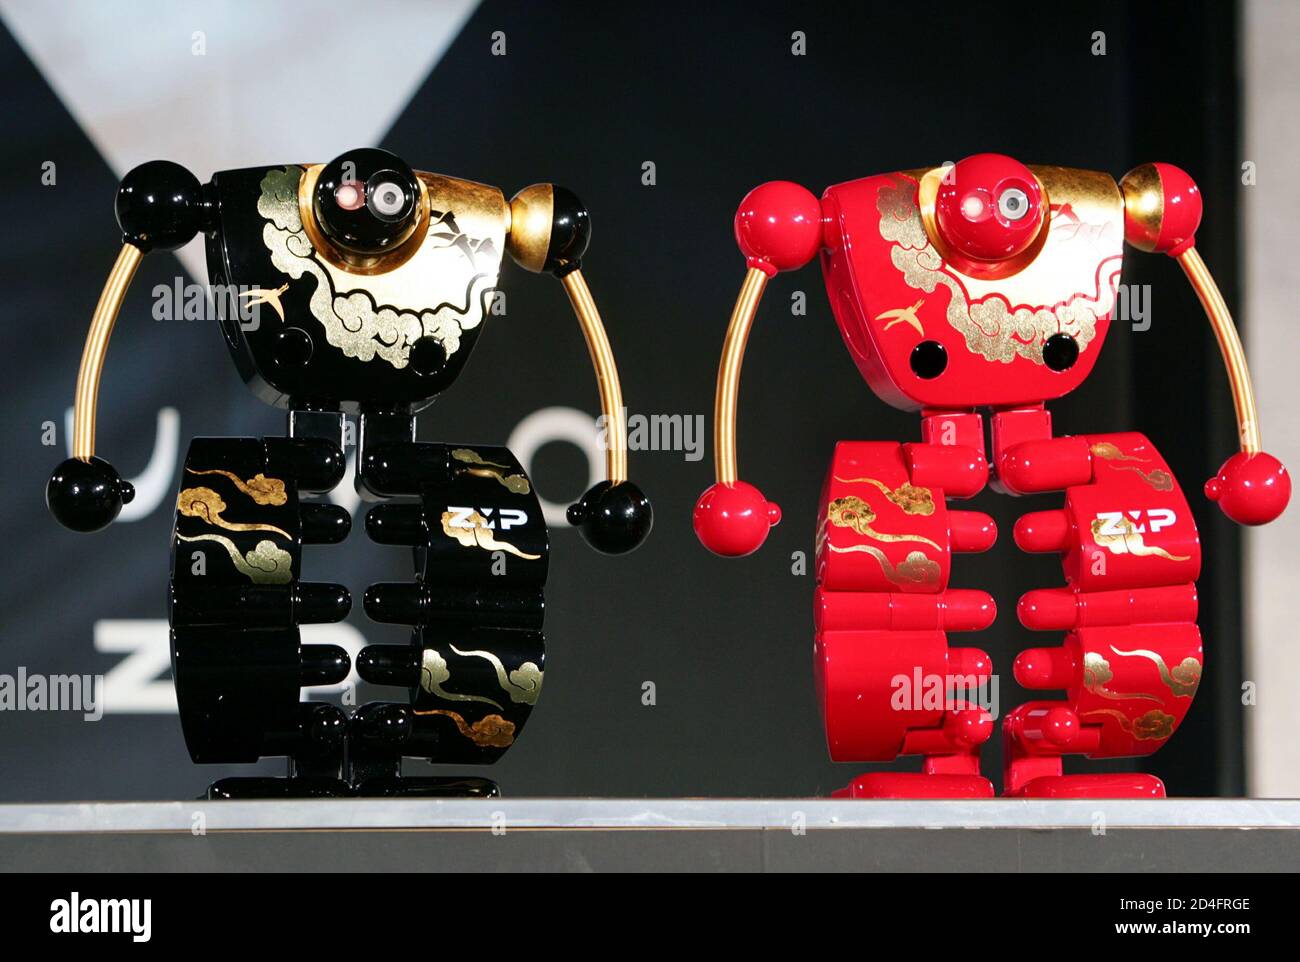 Humanoid robots "nuvo", painted in traditional Japanese lacquer, perform  during a demonstration at robot maker ZMP's office in Tokyo April 12, 2005.  The 39 centimetre-tall (15 inches) human-shaped walking robot, developed by